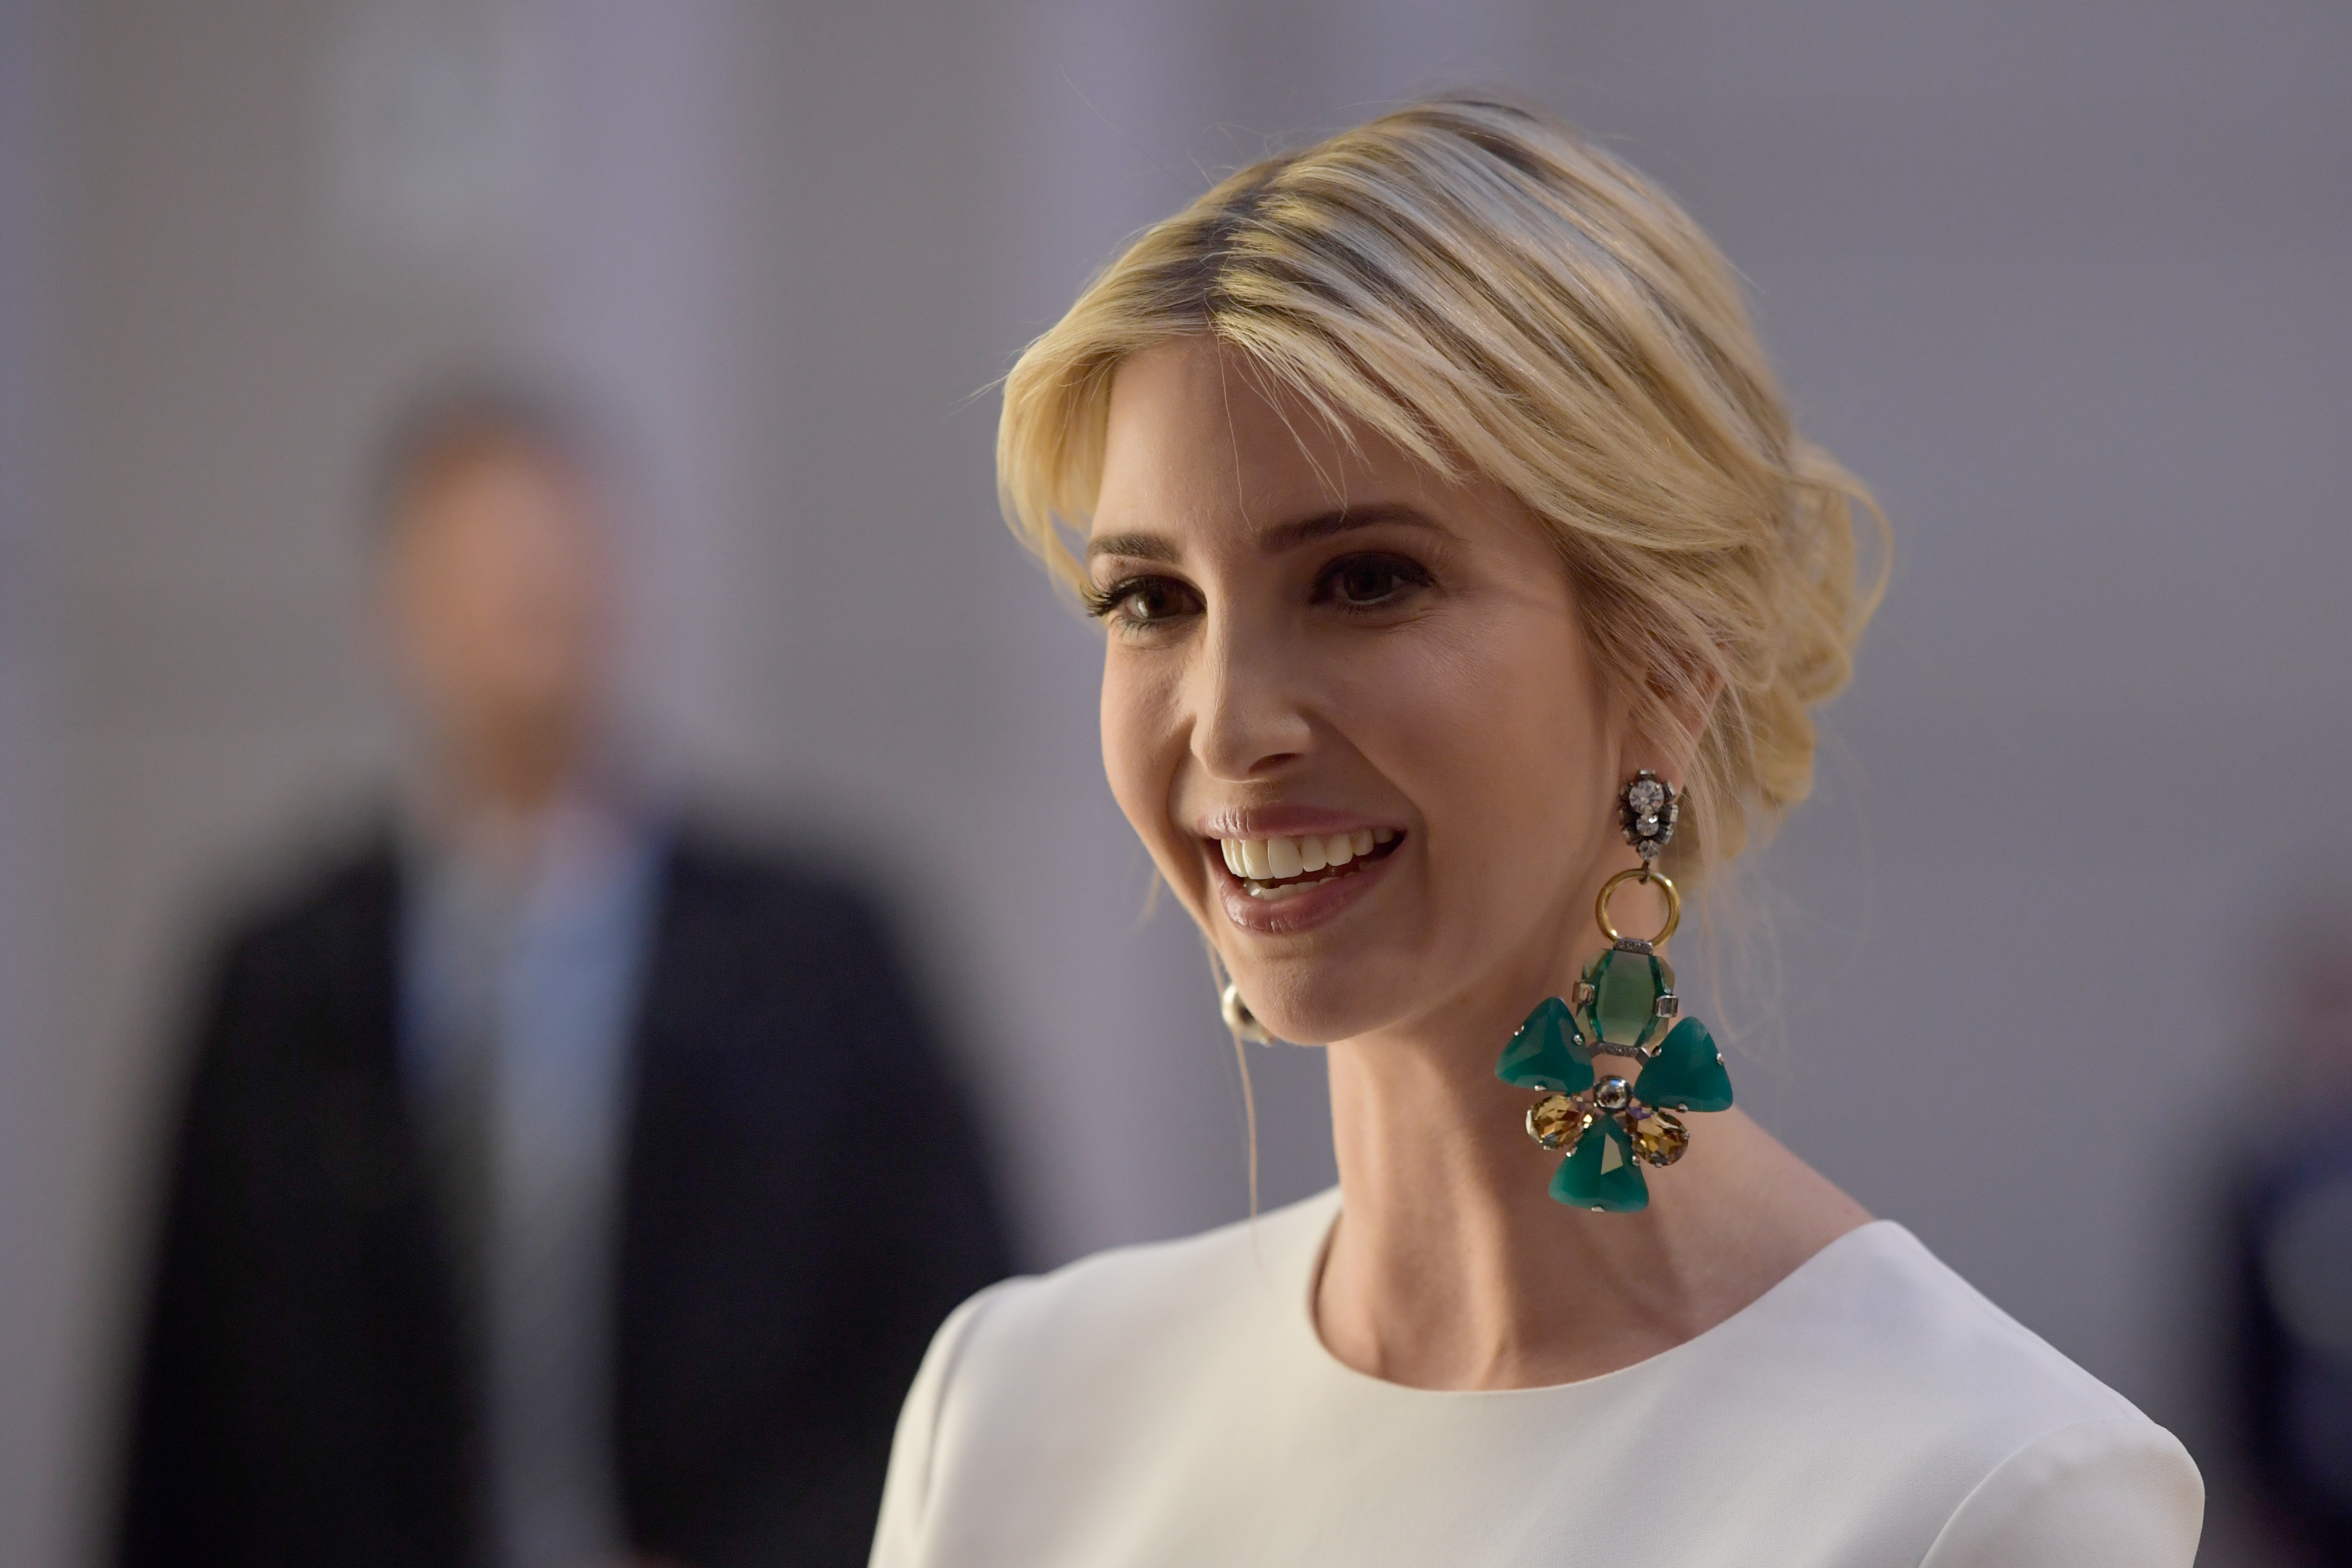 Ivanka Trump, daughter of U.S. President Donald Trump, arrives at a Gala Dinner at Deutsche Bank within the framework of the W20 summit  on April 25, 2017 in Berlin, Germany. (Pool&mdash;Getty Images)